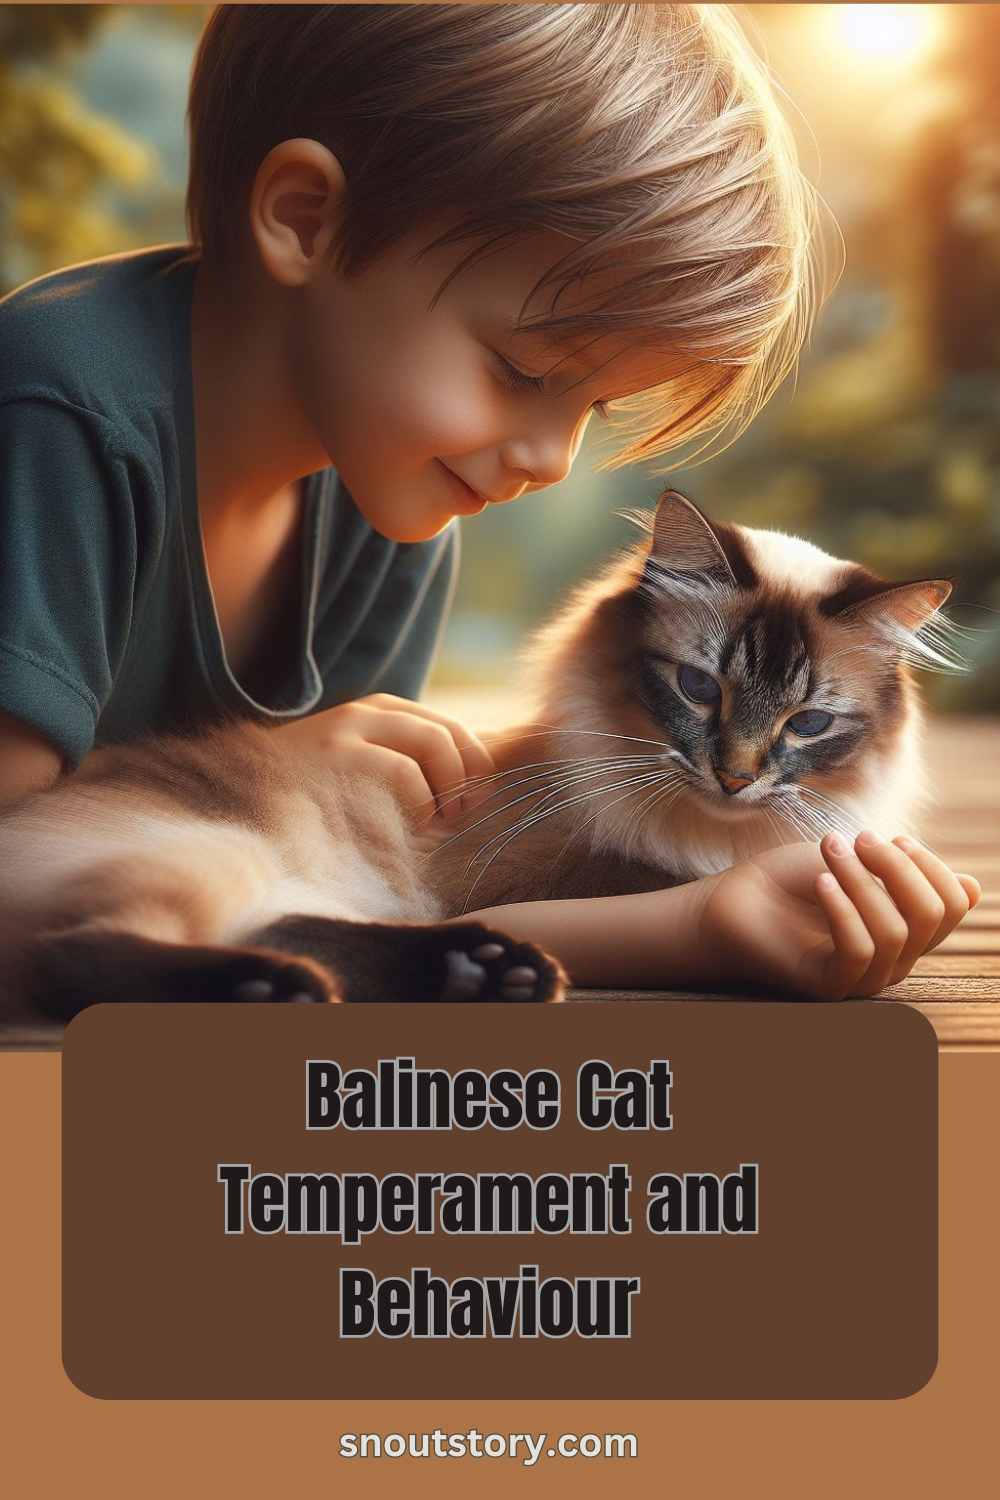 Balinese Cat Temperament And Behaviour – Everything a New Owner Should Know